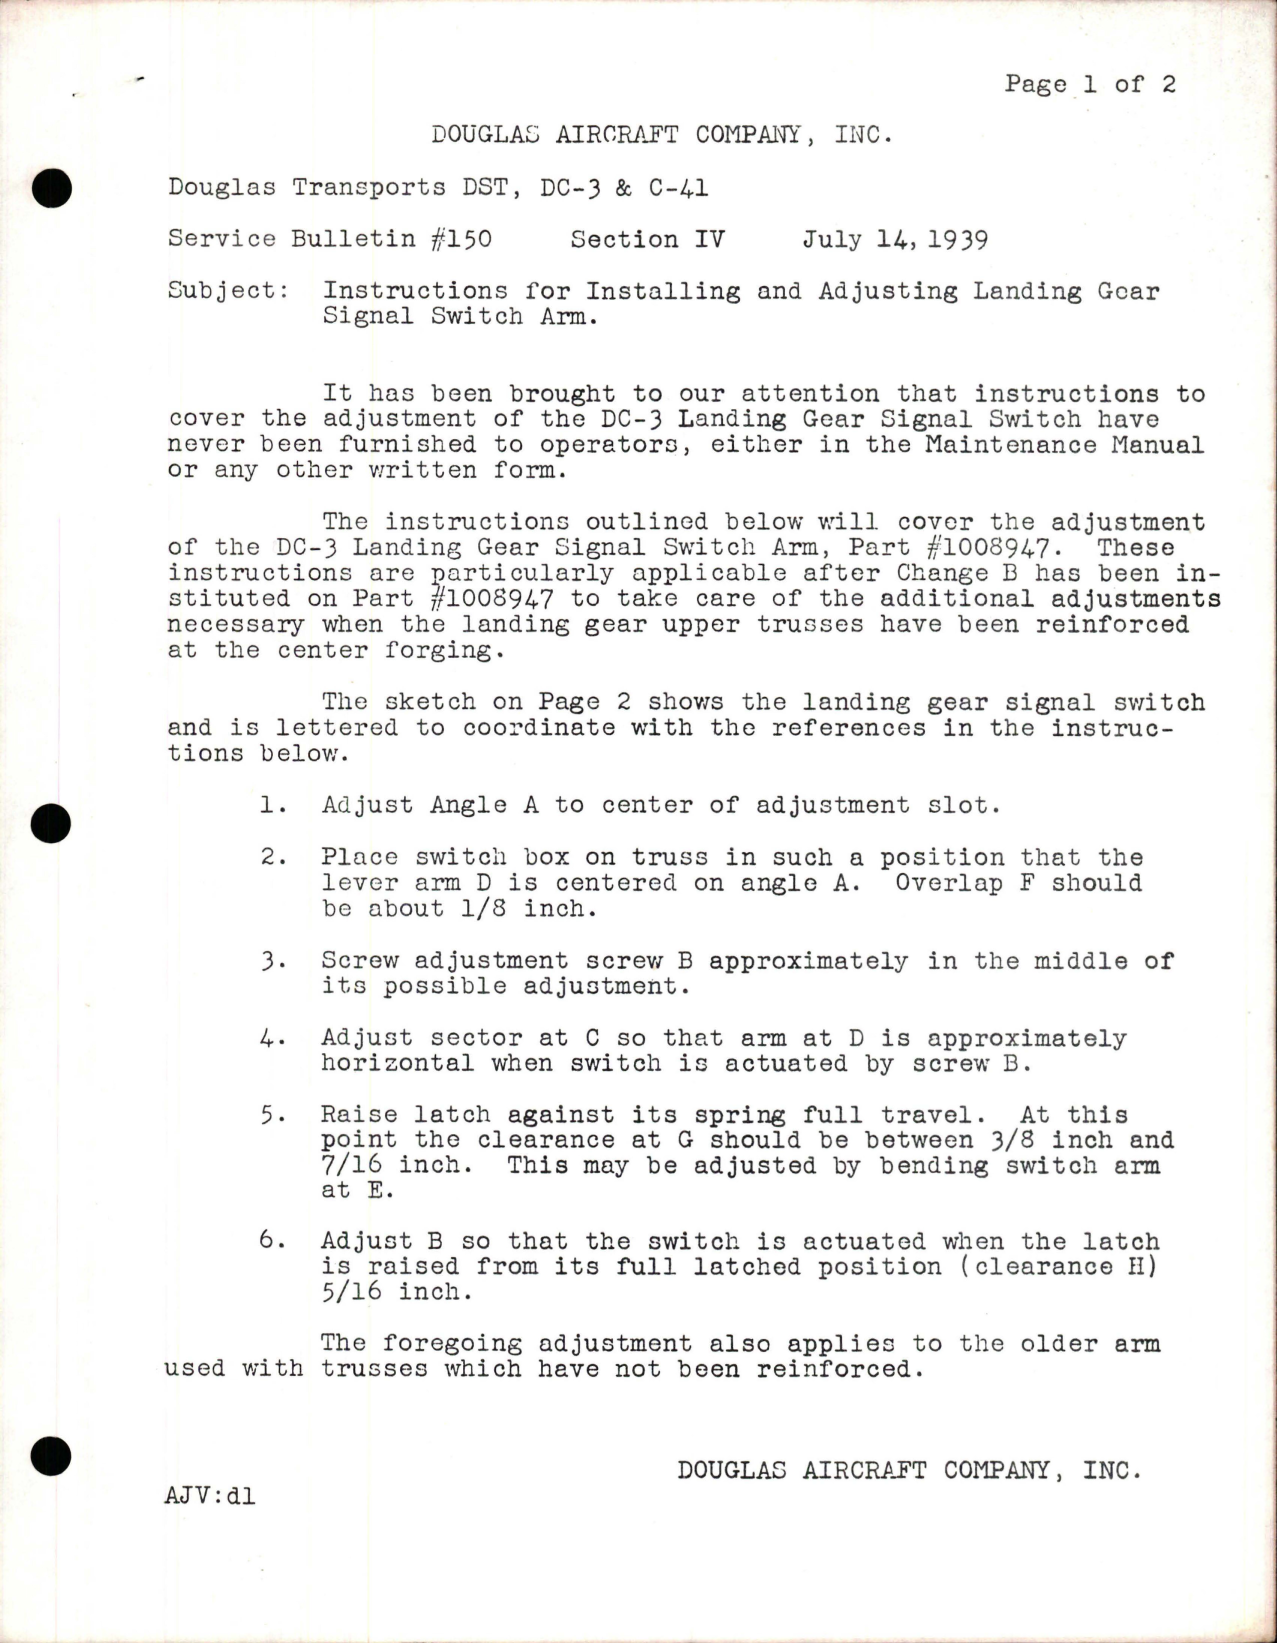 Sample page 1 from AirCorps Library document: Instructions for Installing and Adjusting Landing Gear Signal Switch Arm